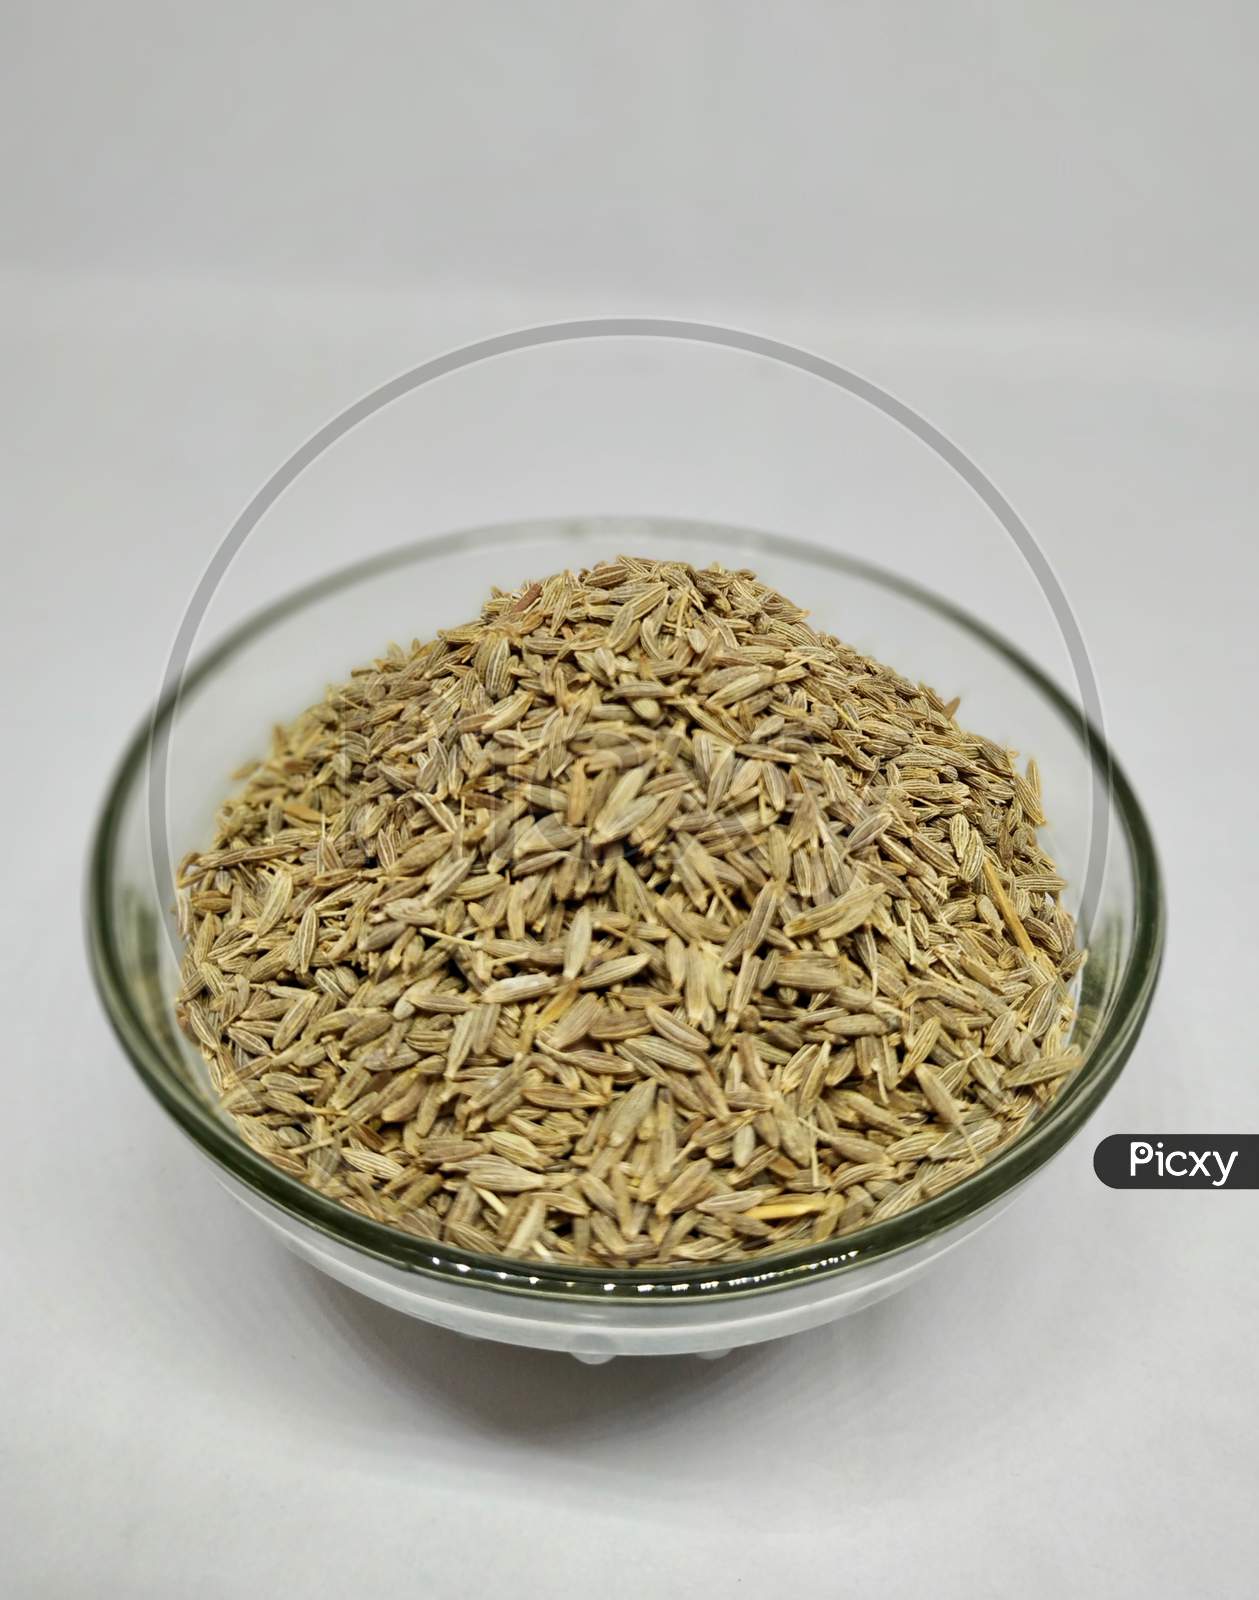 Cumin Or Zeera In A Glass Bowl On White Background Stock Photo